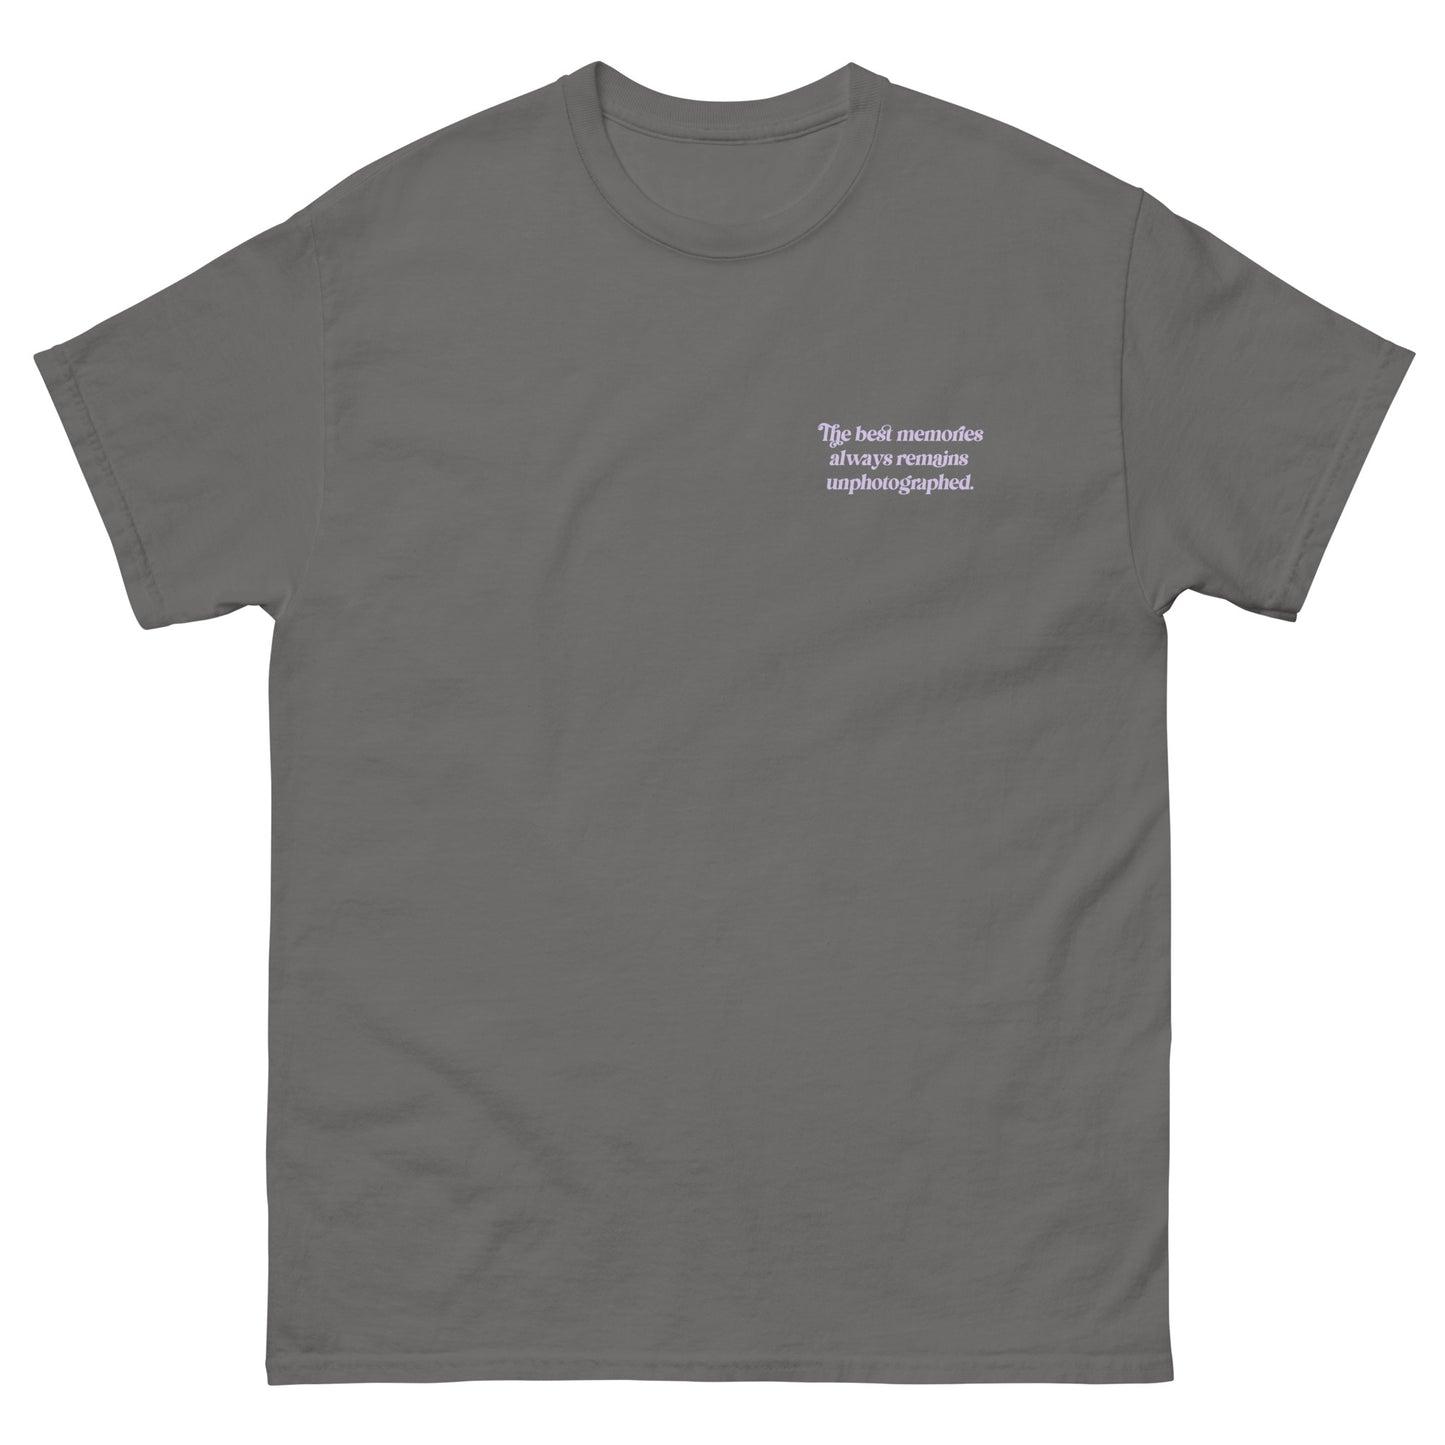 Dark Gray High Quality Tee - Front Design with "The best memories always remains unphotographed " print on left chest - Back Design with a Phrase "The best memories always remains unphotographed." print and three pictures of sky.